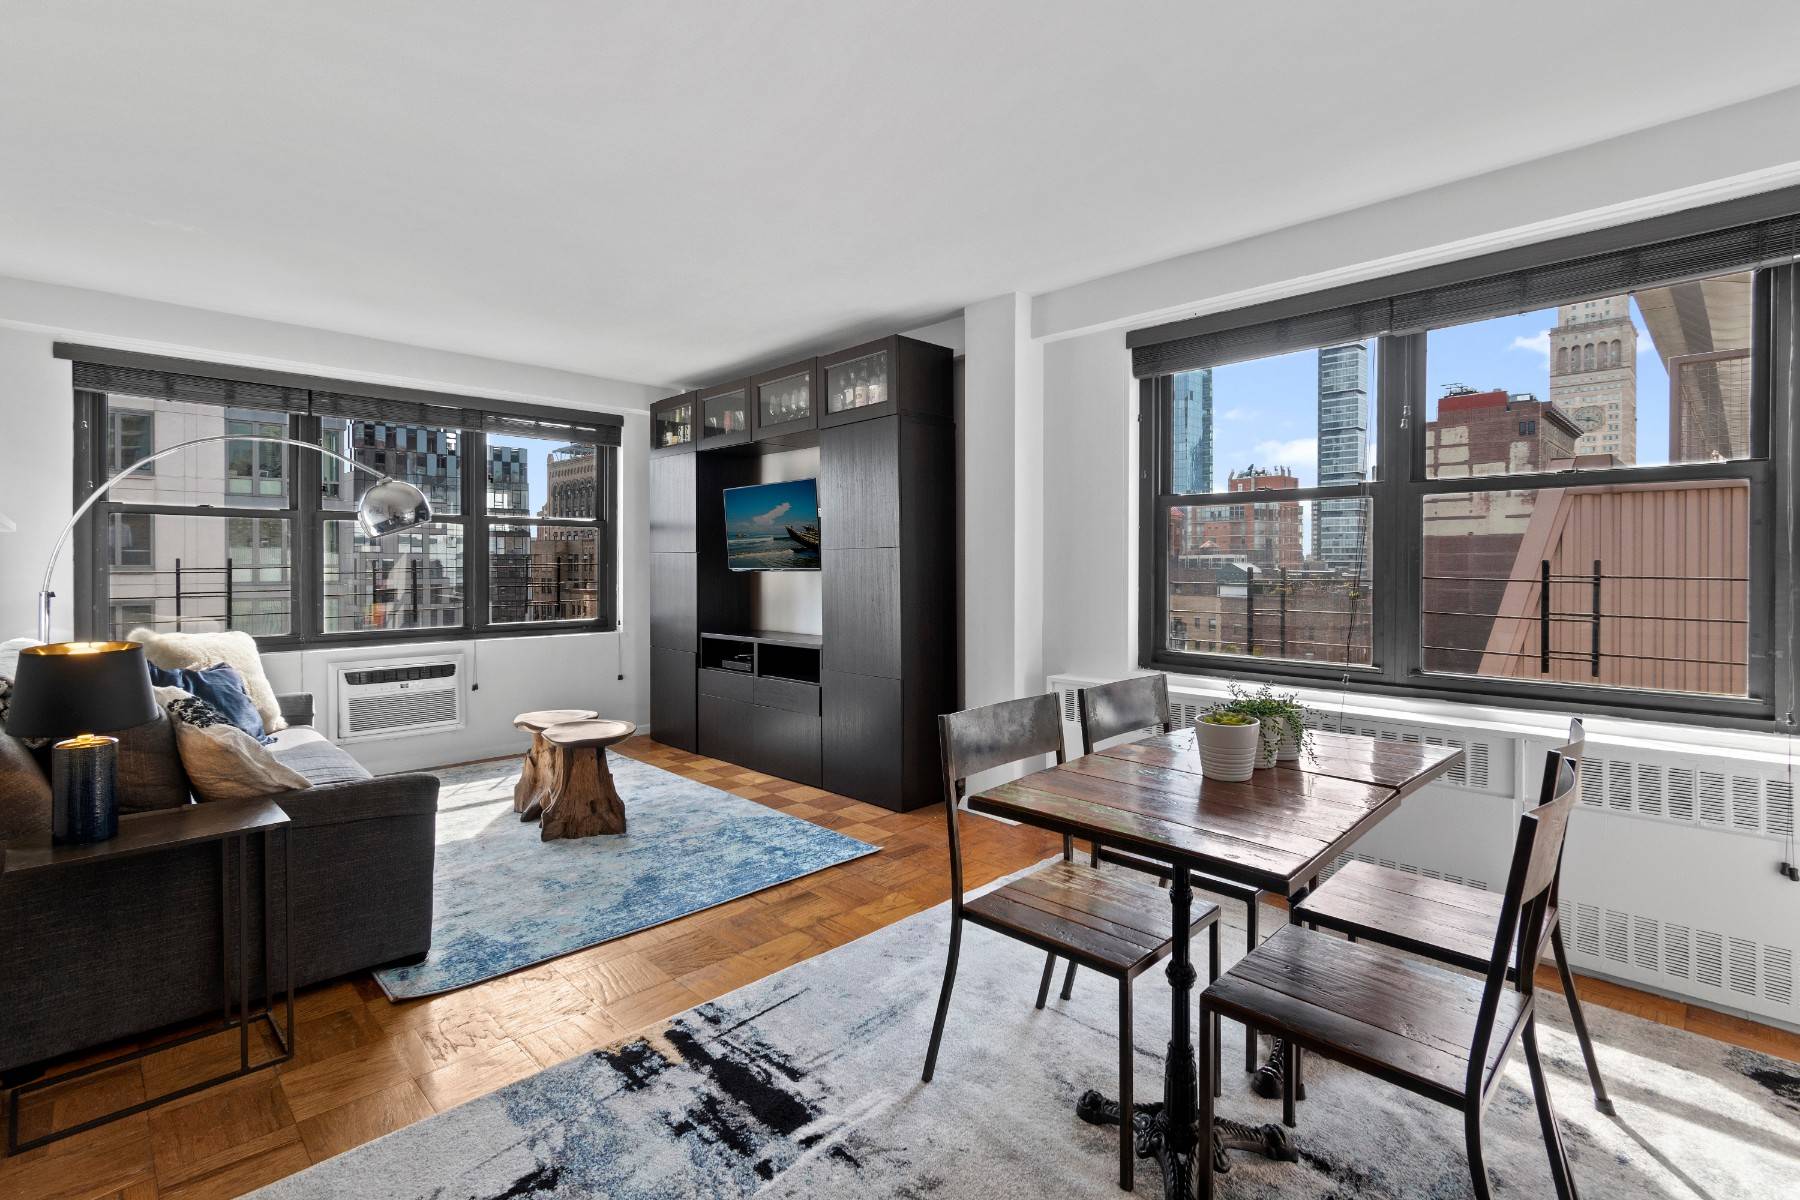 Perched on the top floor with unobstructed views of the Manhattan skyline, Williamsburg Bridge, Chrysler Building, and One Vanderbilt, this corner one bedroom apartment benefits from excellent light throughout as ...